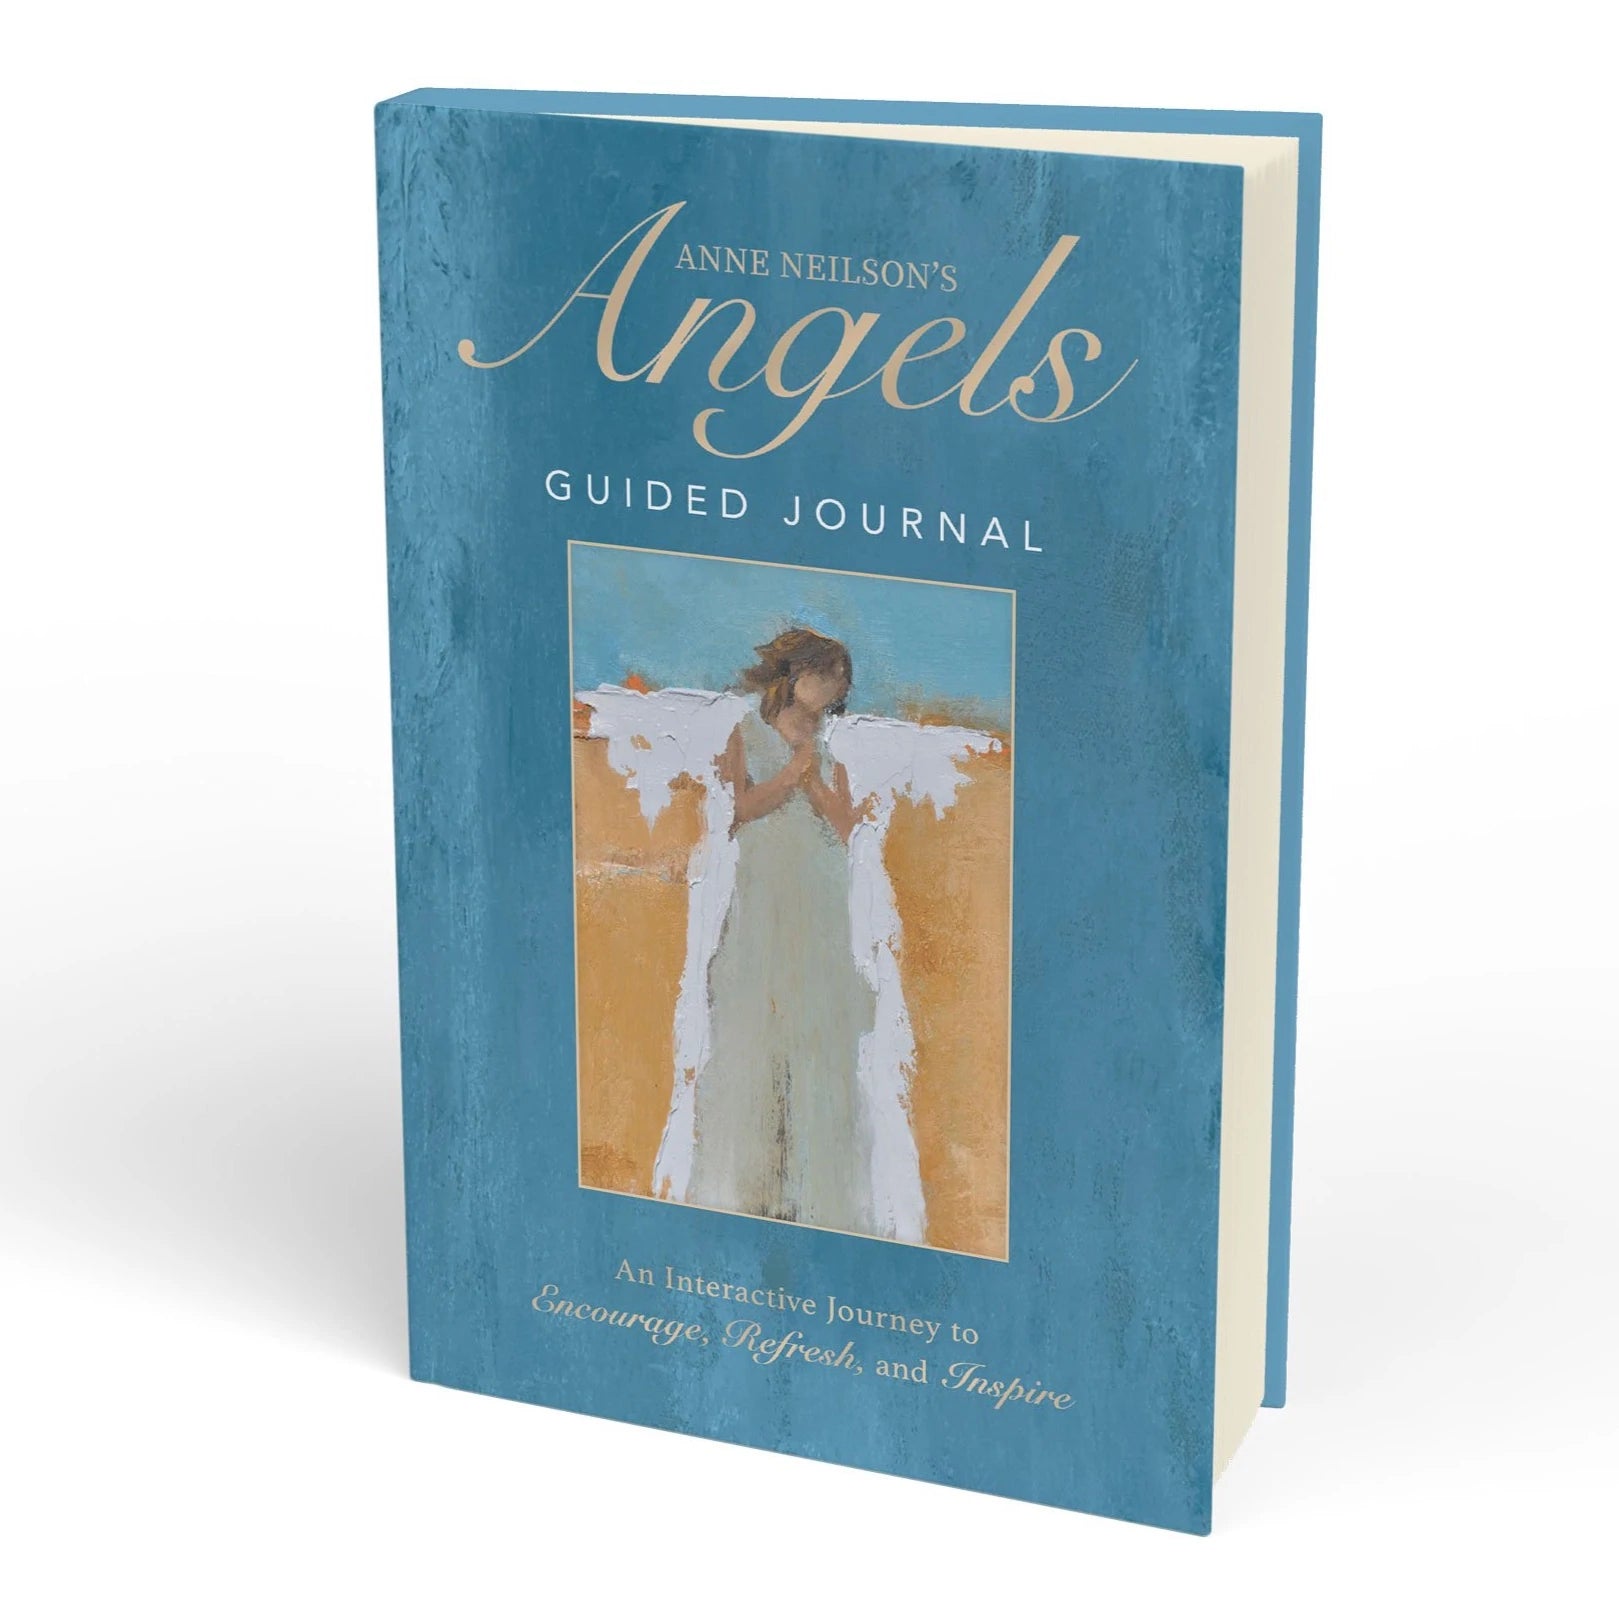 Angel's Guided Journal: An Interactive Journey to Encourage, Refresh and Inspire